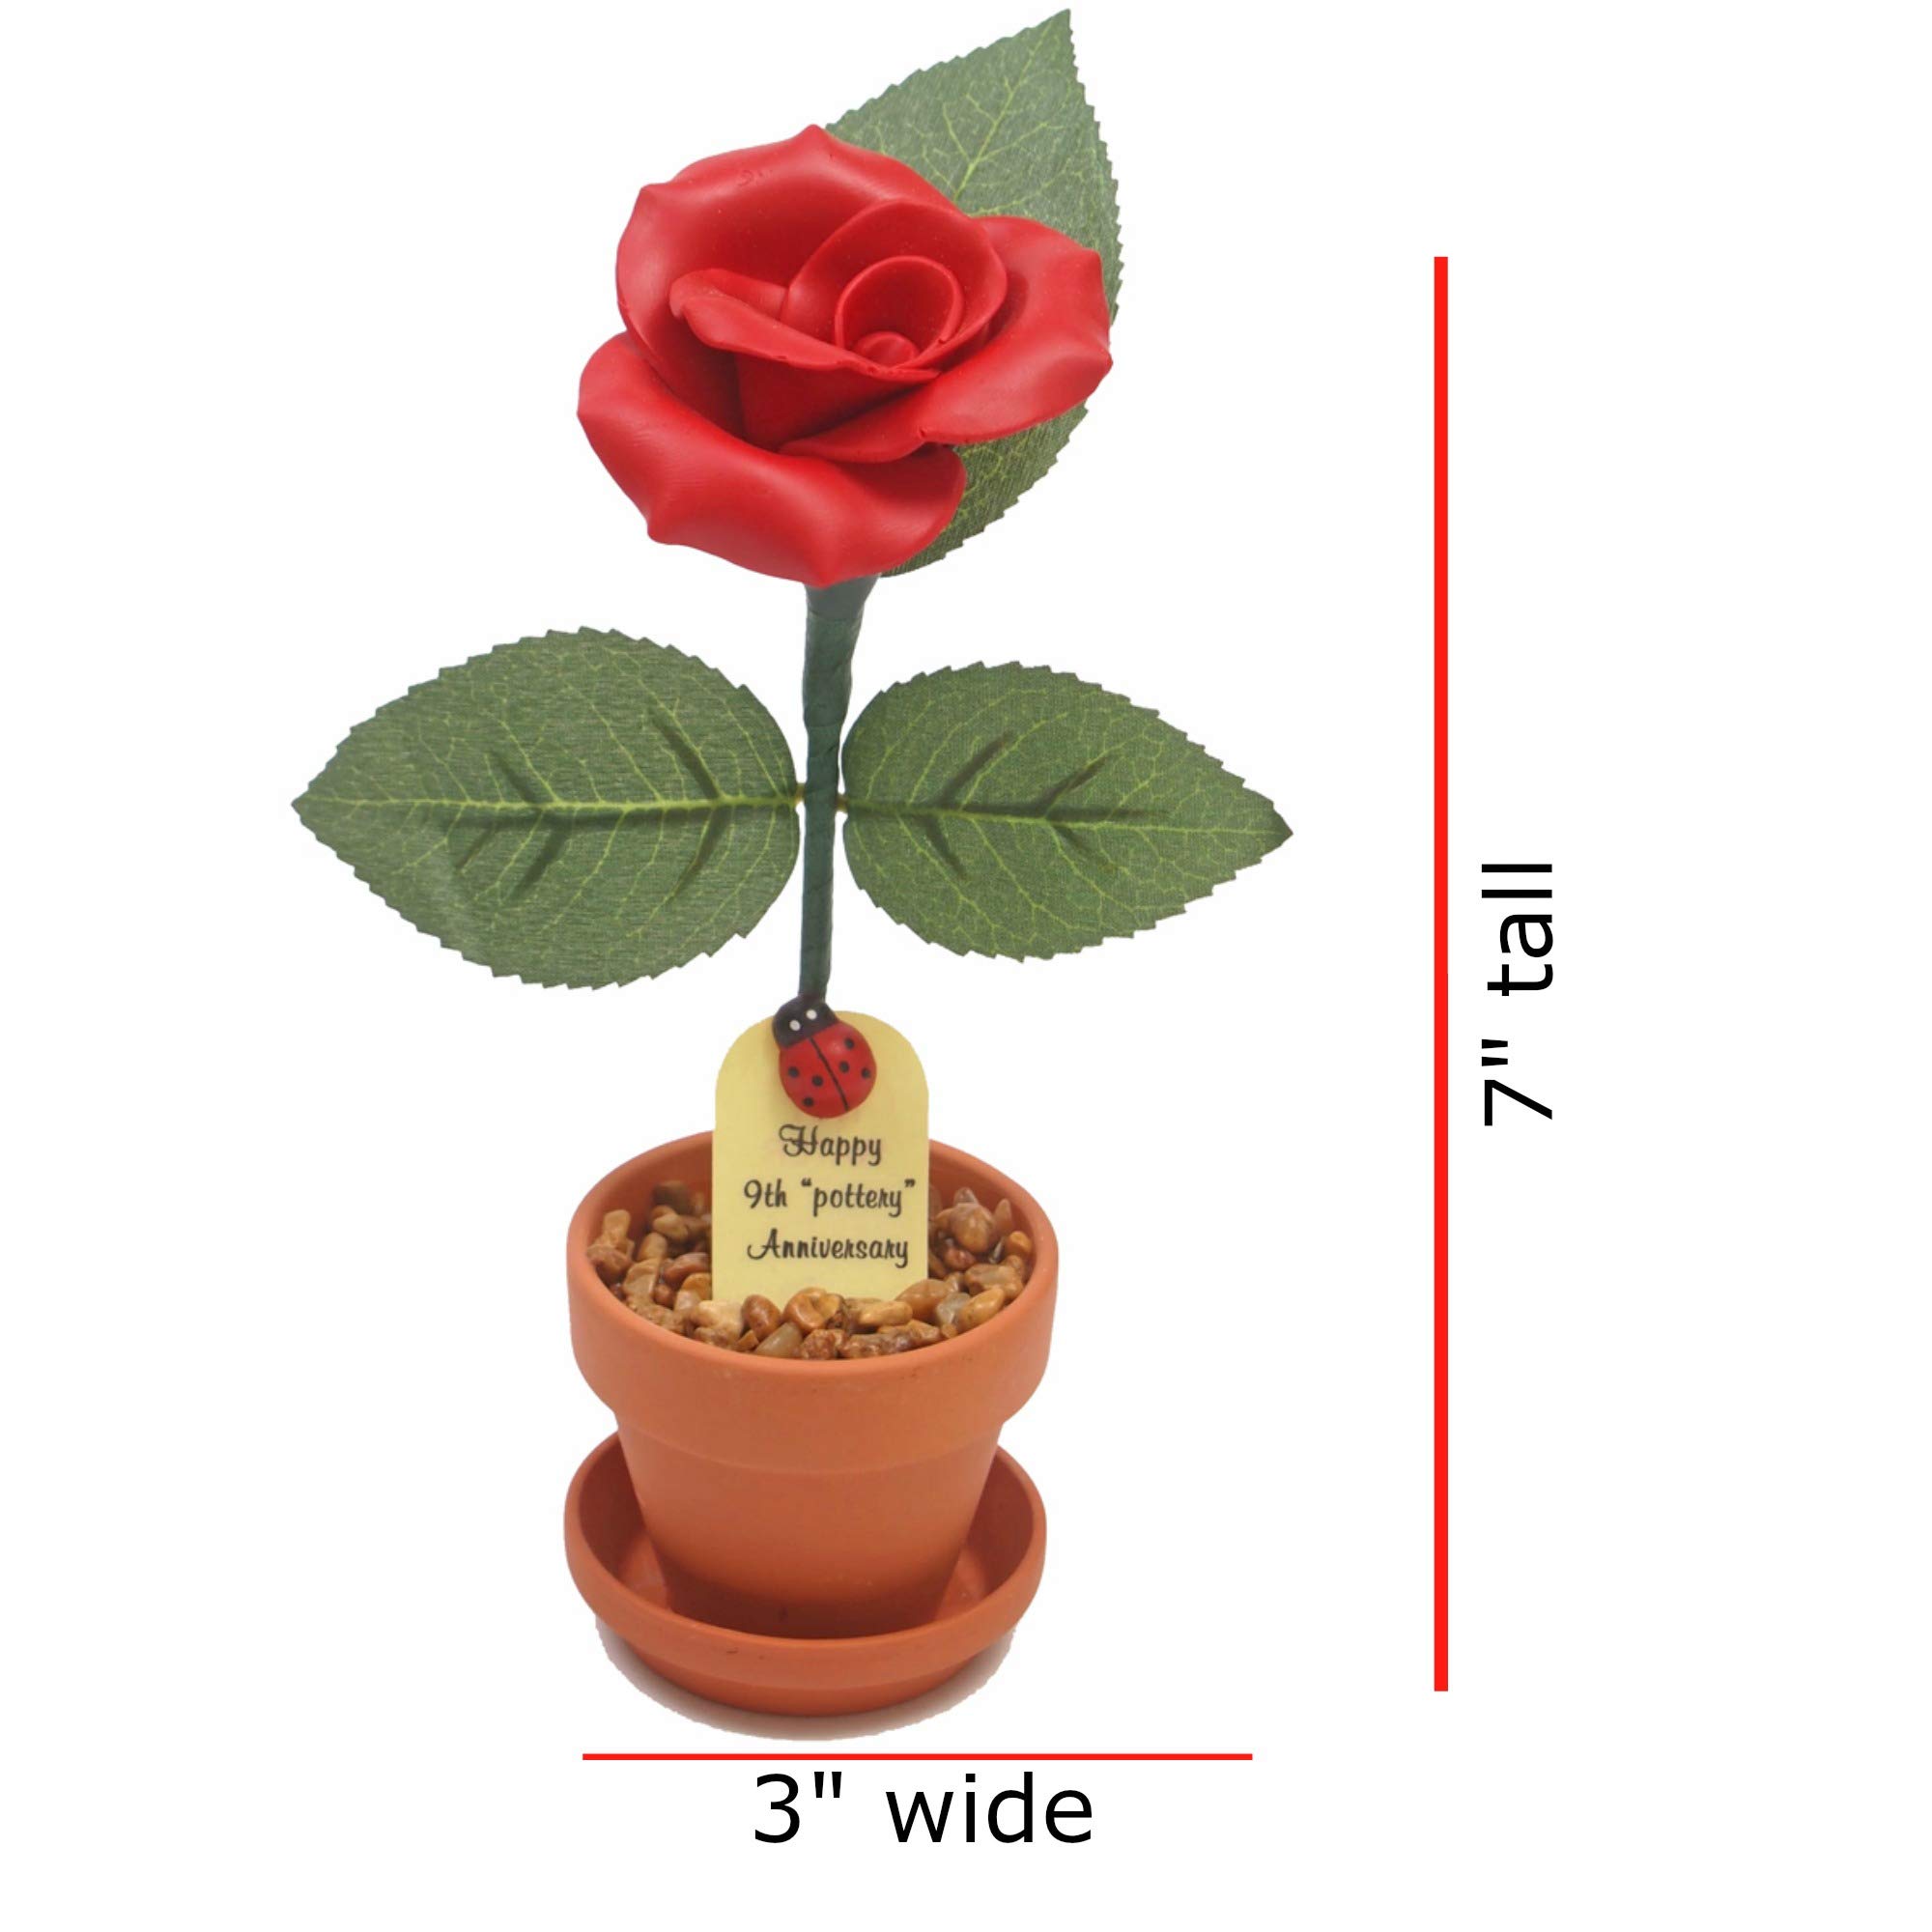 JustPaperRoses 9th Year Wedding Anniversary 7 inch Potted Pottery Desk Rose Flower